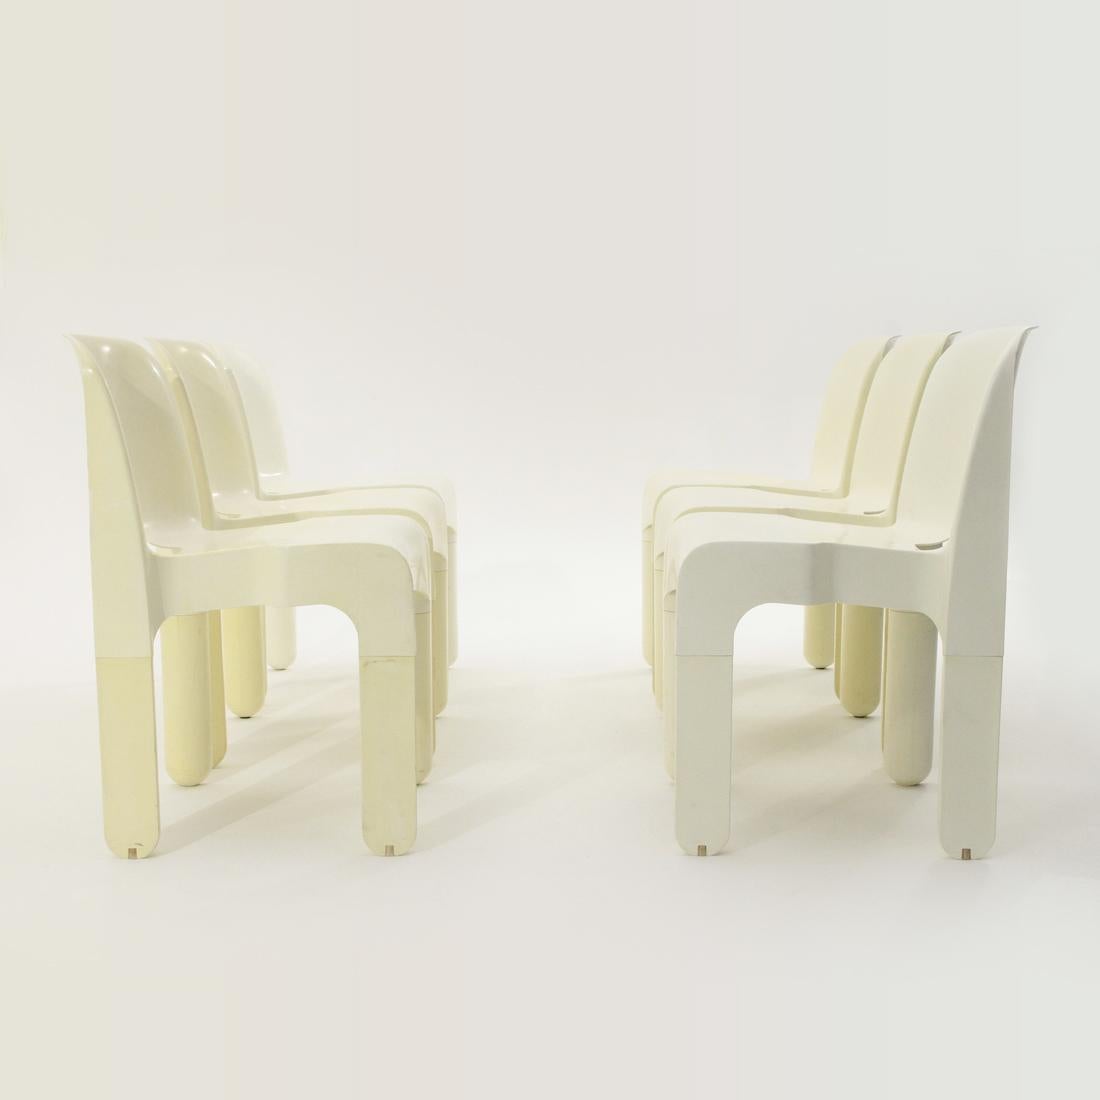 Italian 6 “4860” Chairs in White Plastic by Joe Colombo for Kartell, 1960s